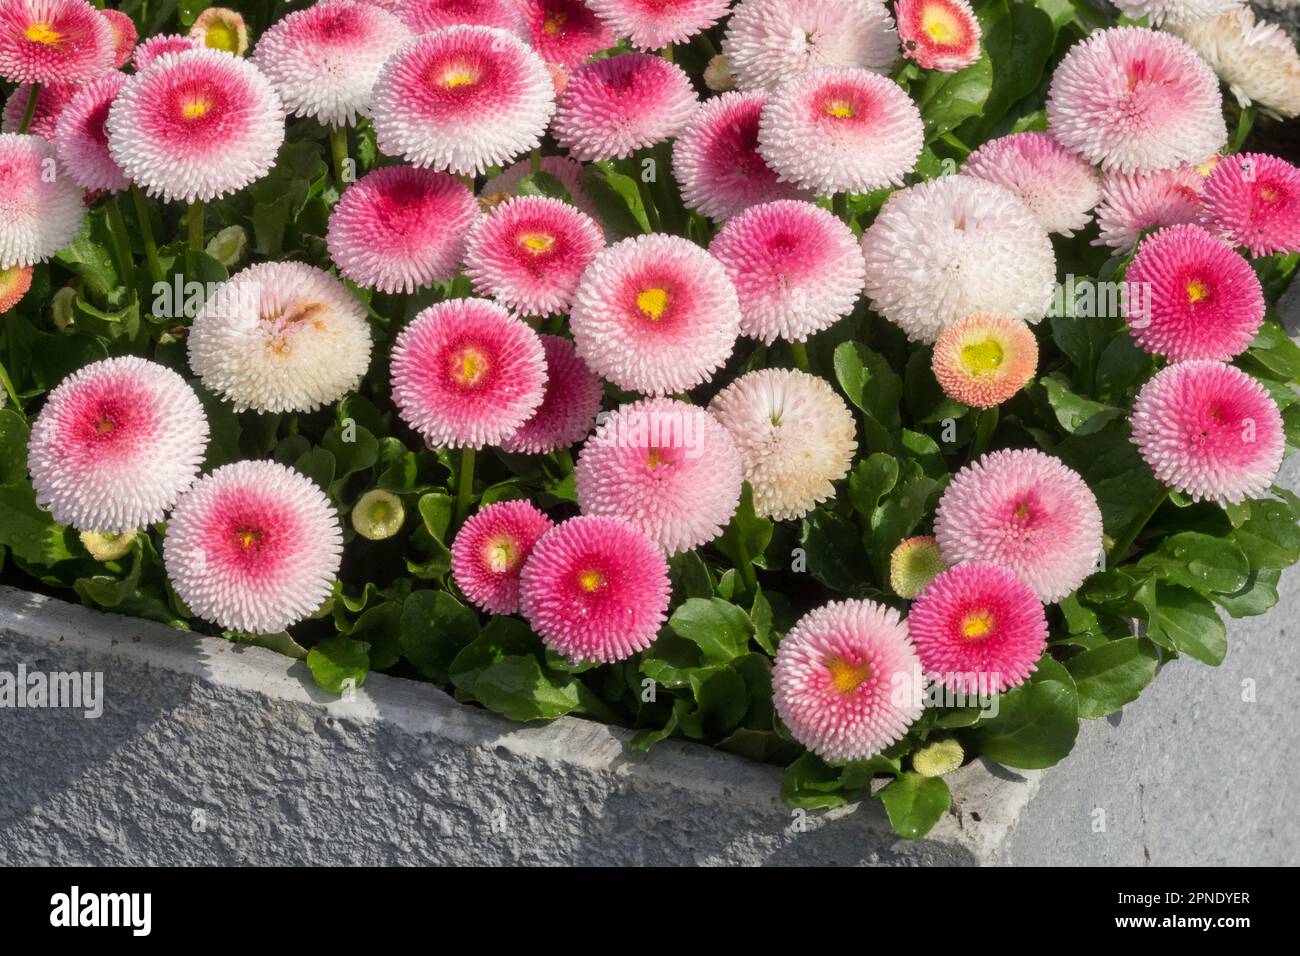 English Daisy, Bellis Pomponette, Container spring bedding plants Stock Photo